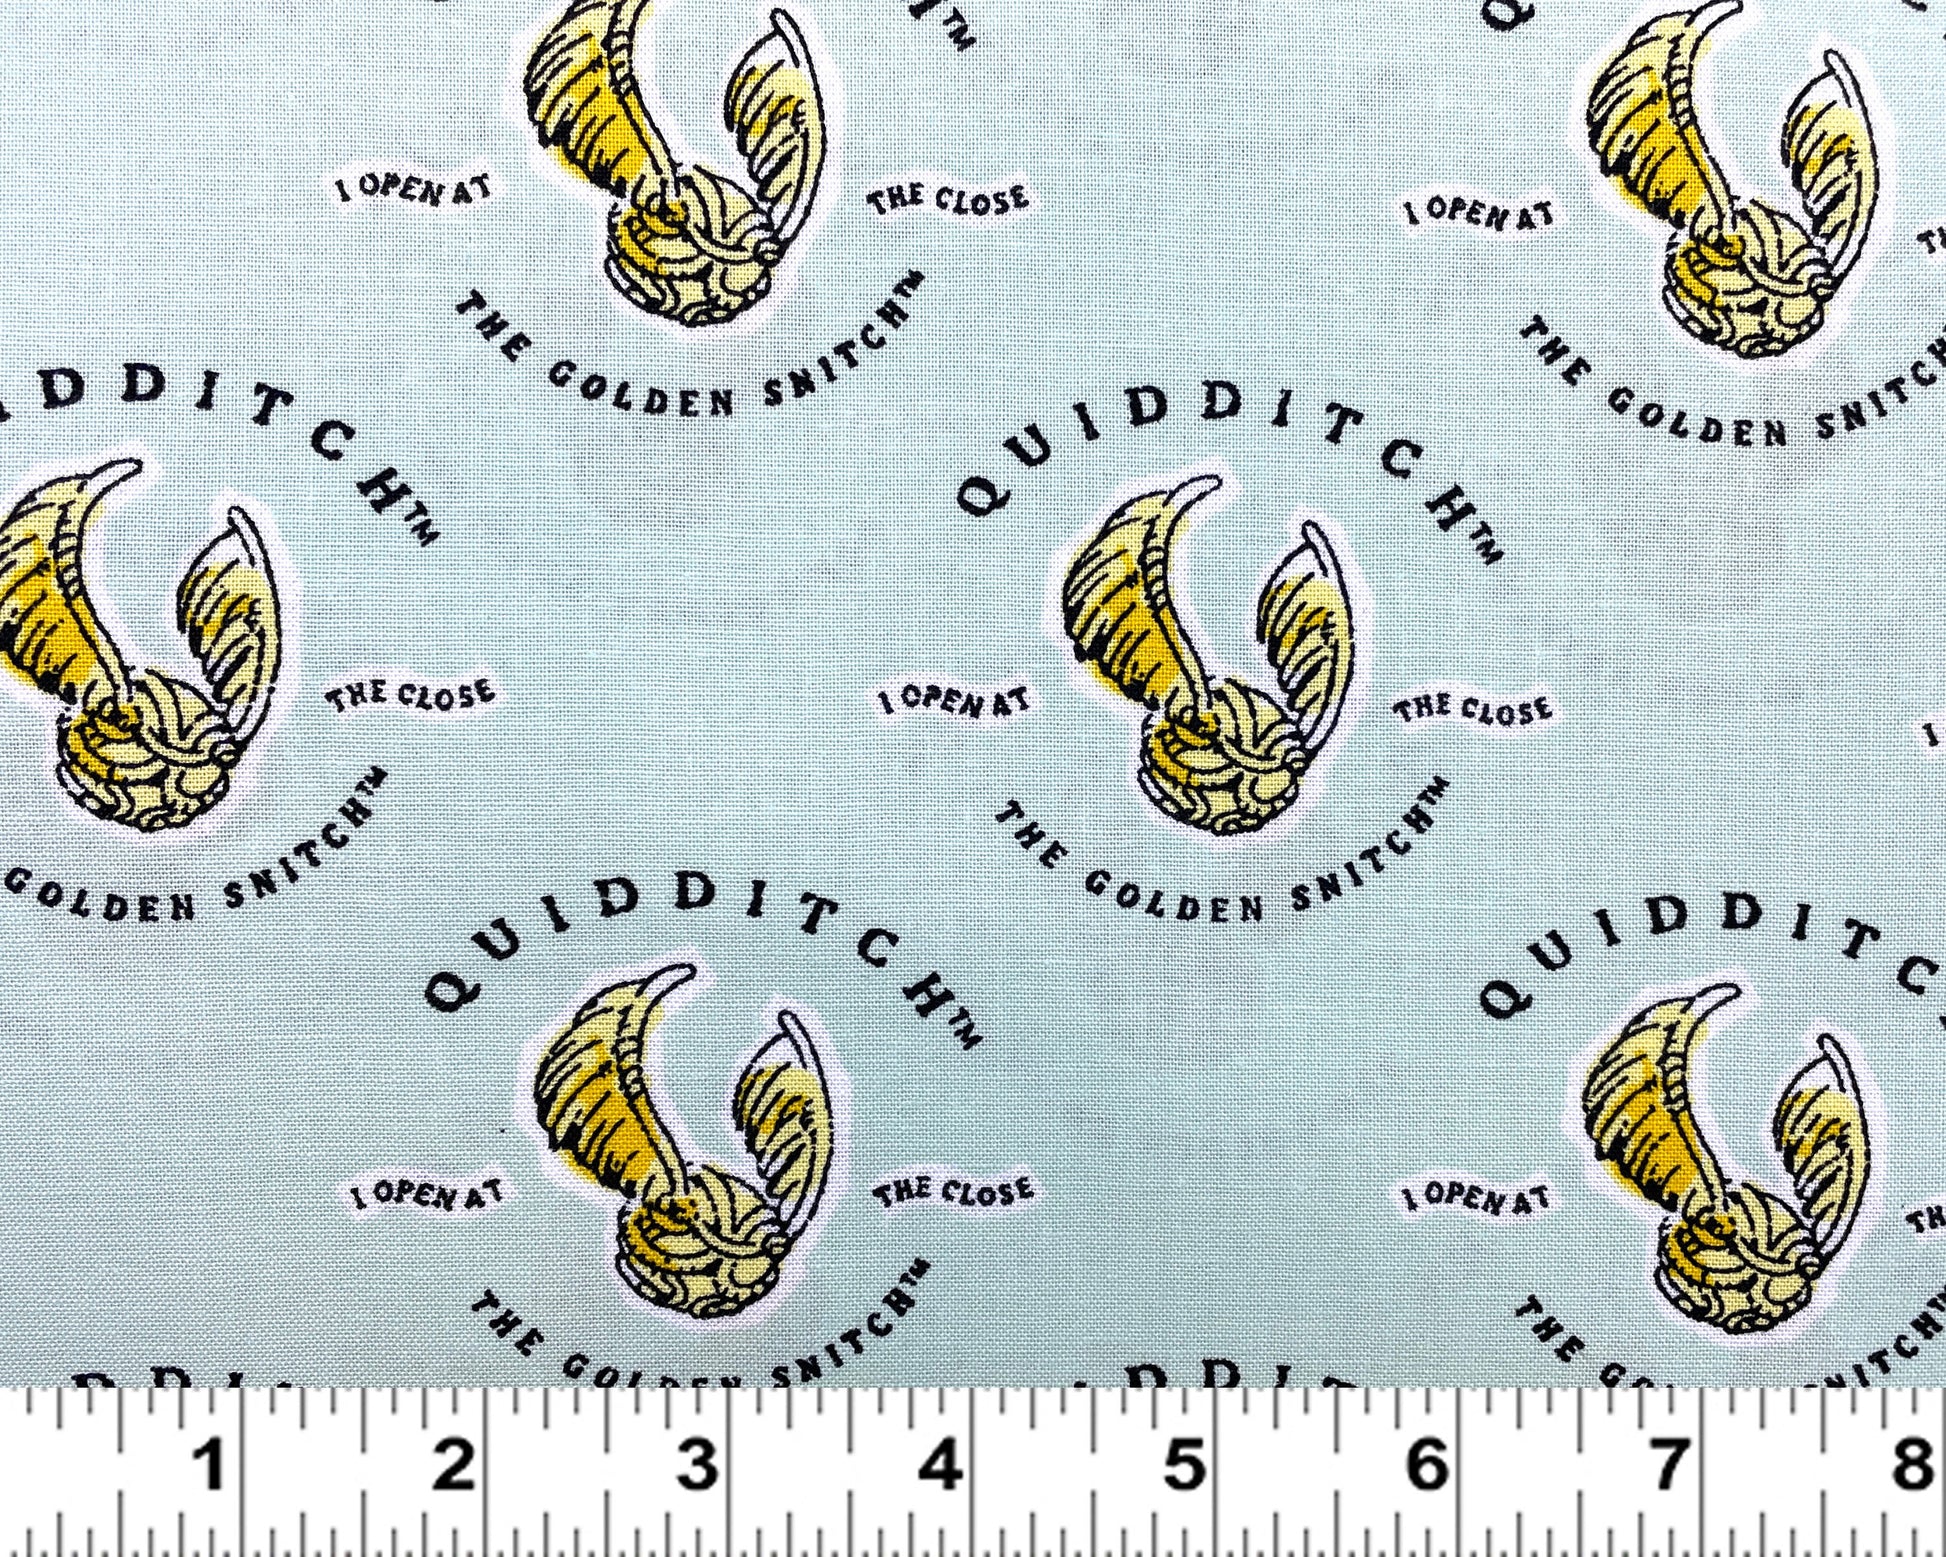 Harry Potter fabric by the yard - Quidditch Mint - 100% cotton - Camelot Fabrics - Golden Snitch Harry Potter material - SHIPS NEXT DAY